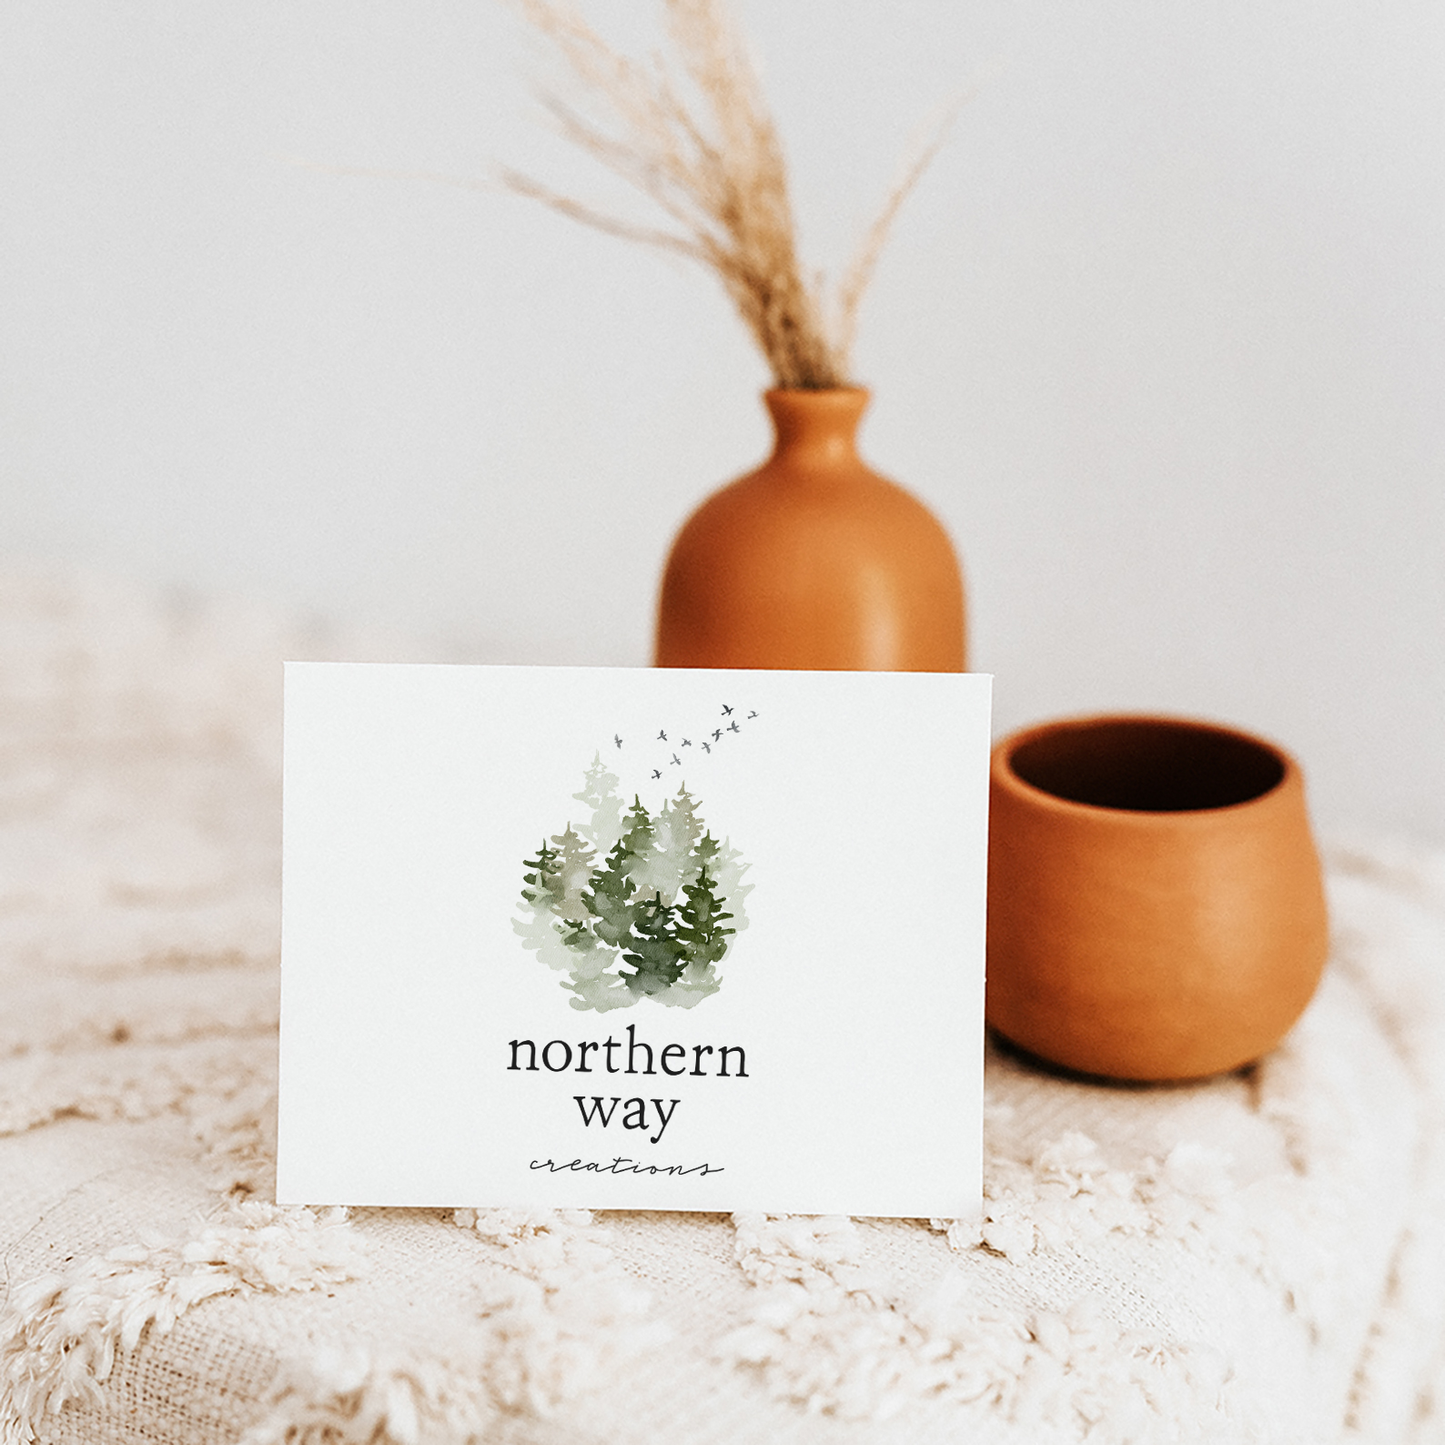 Northern Way | Premade Logo Design | Forest, Woodland, Pine Tree, Rustic, Outdoors, Nature